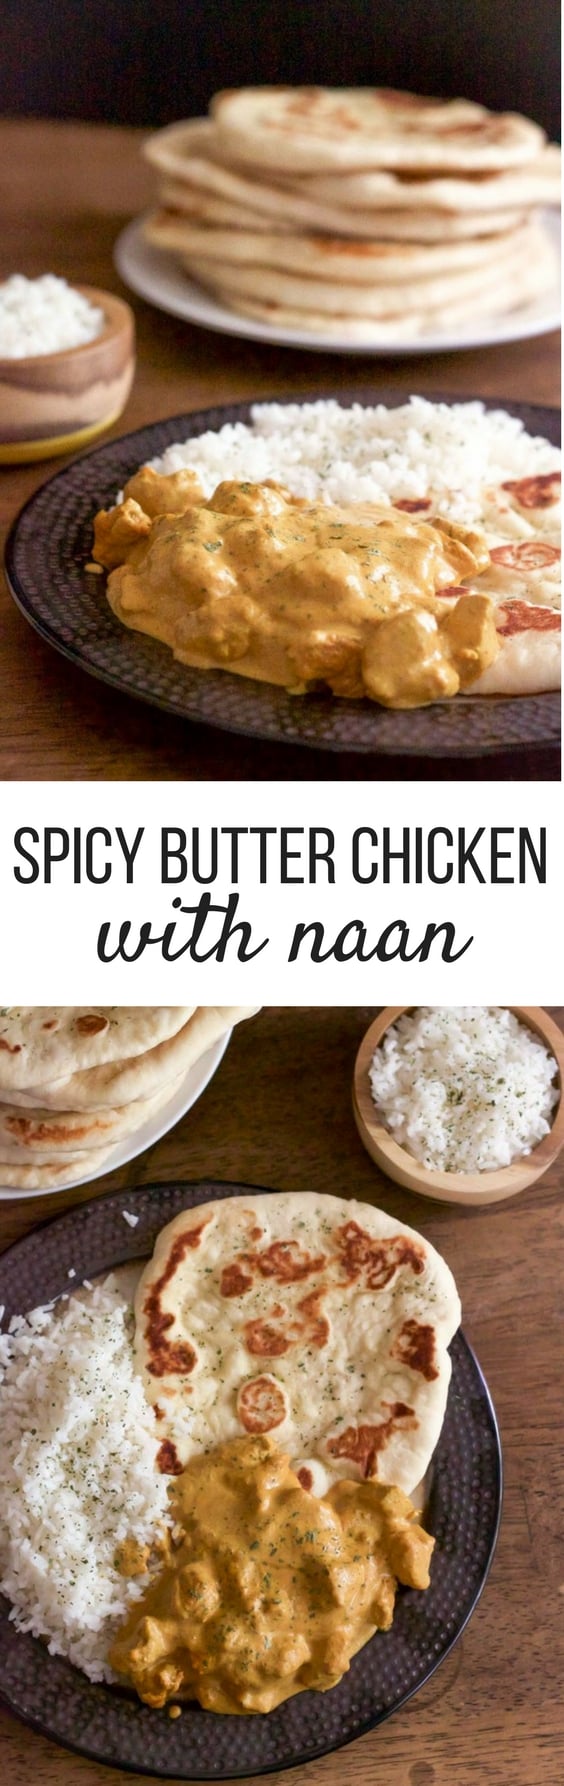 Creamy Butter Chicken - No need to simmer this curry for hours, this recipe is ready in less than 40 minutes! | wanderzestblog.com